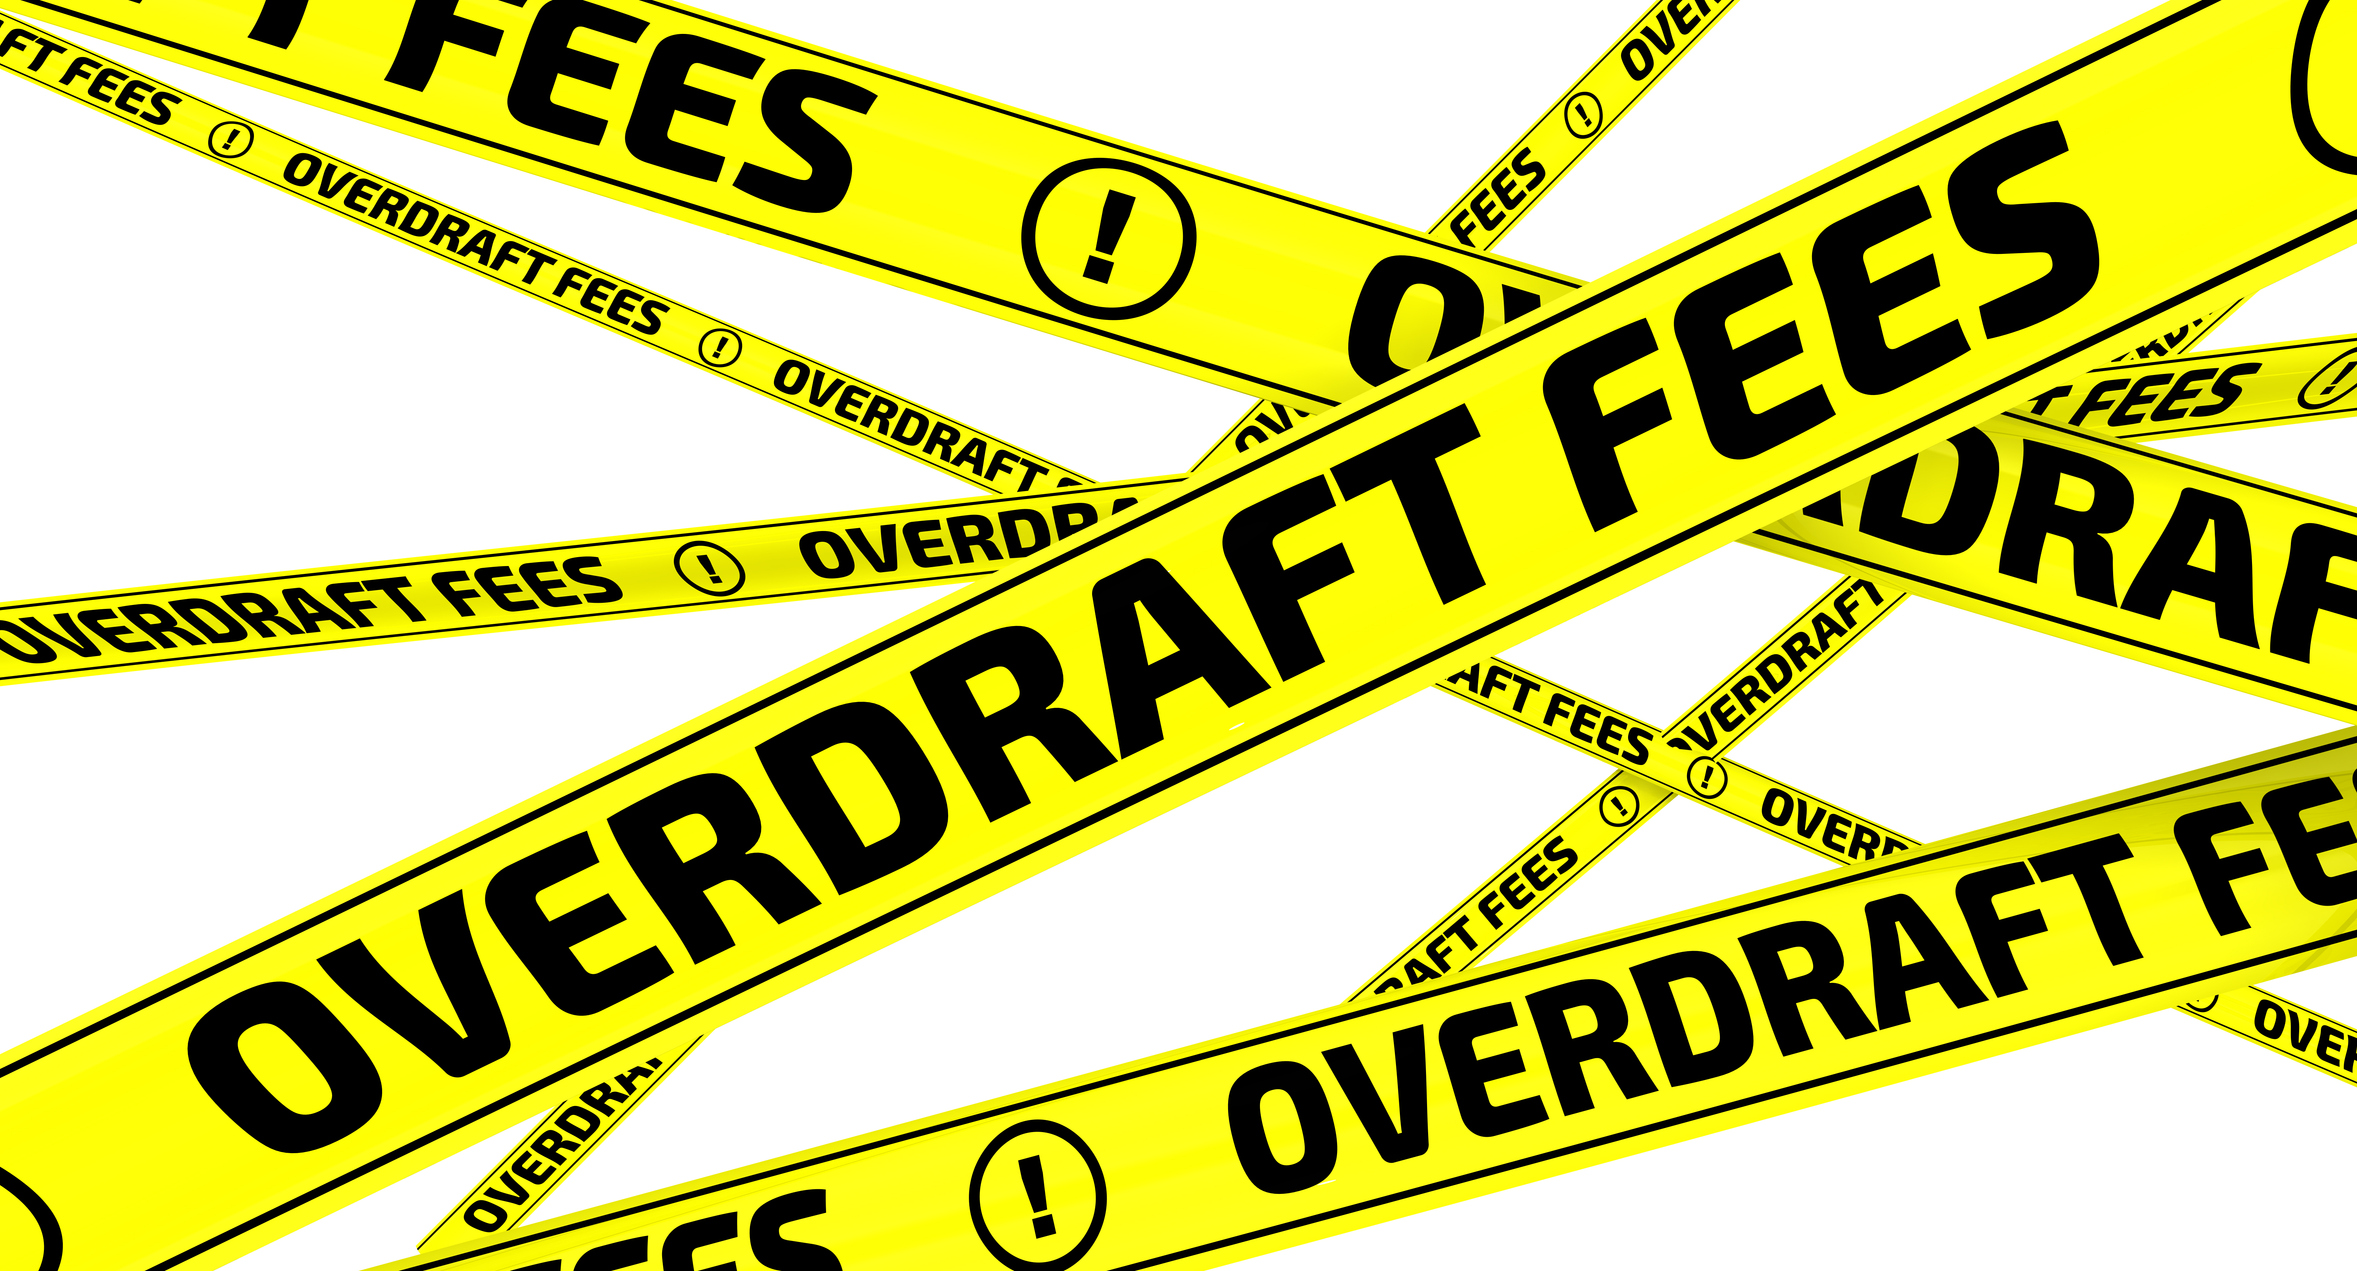 Overdraft Fees Understand & Avoid- Complete Controller